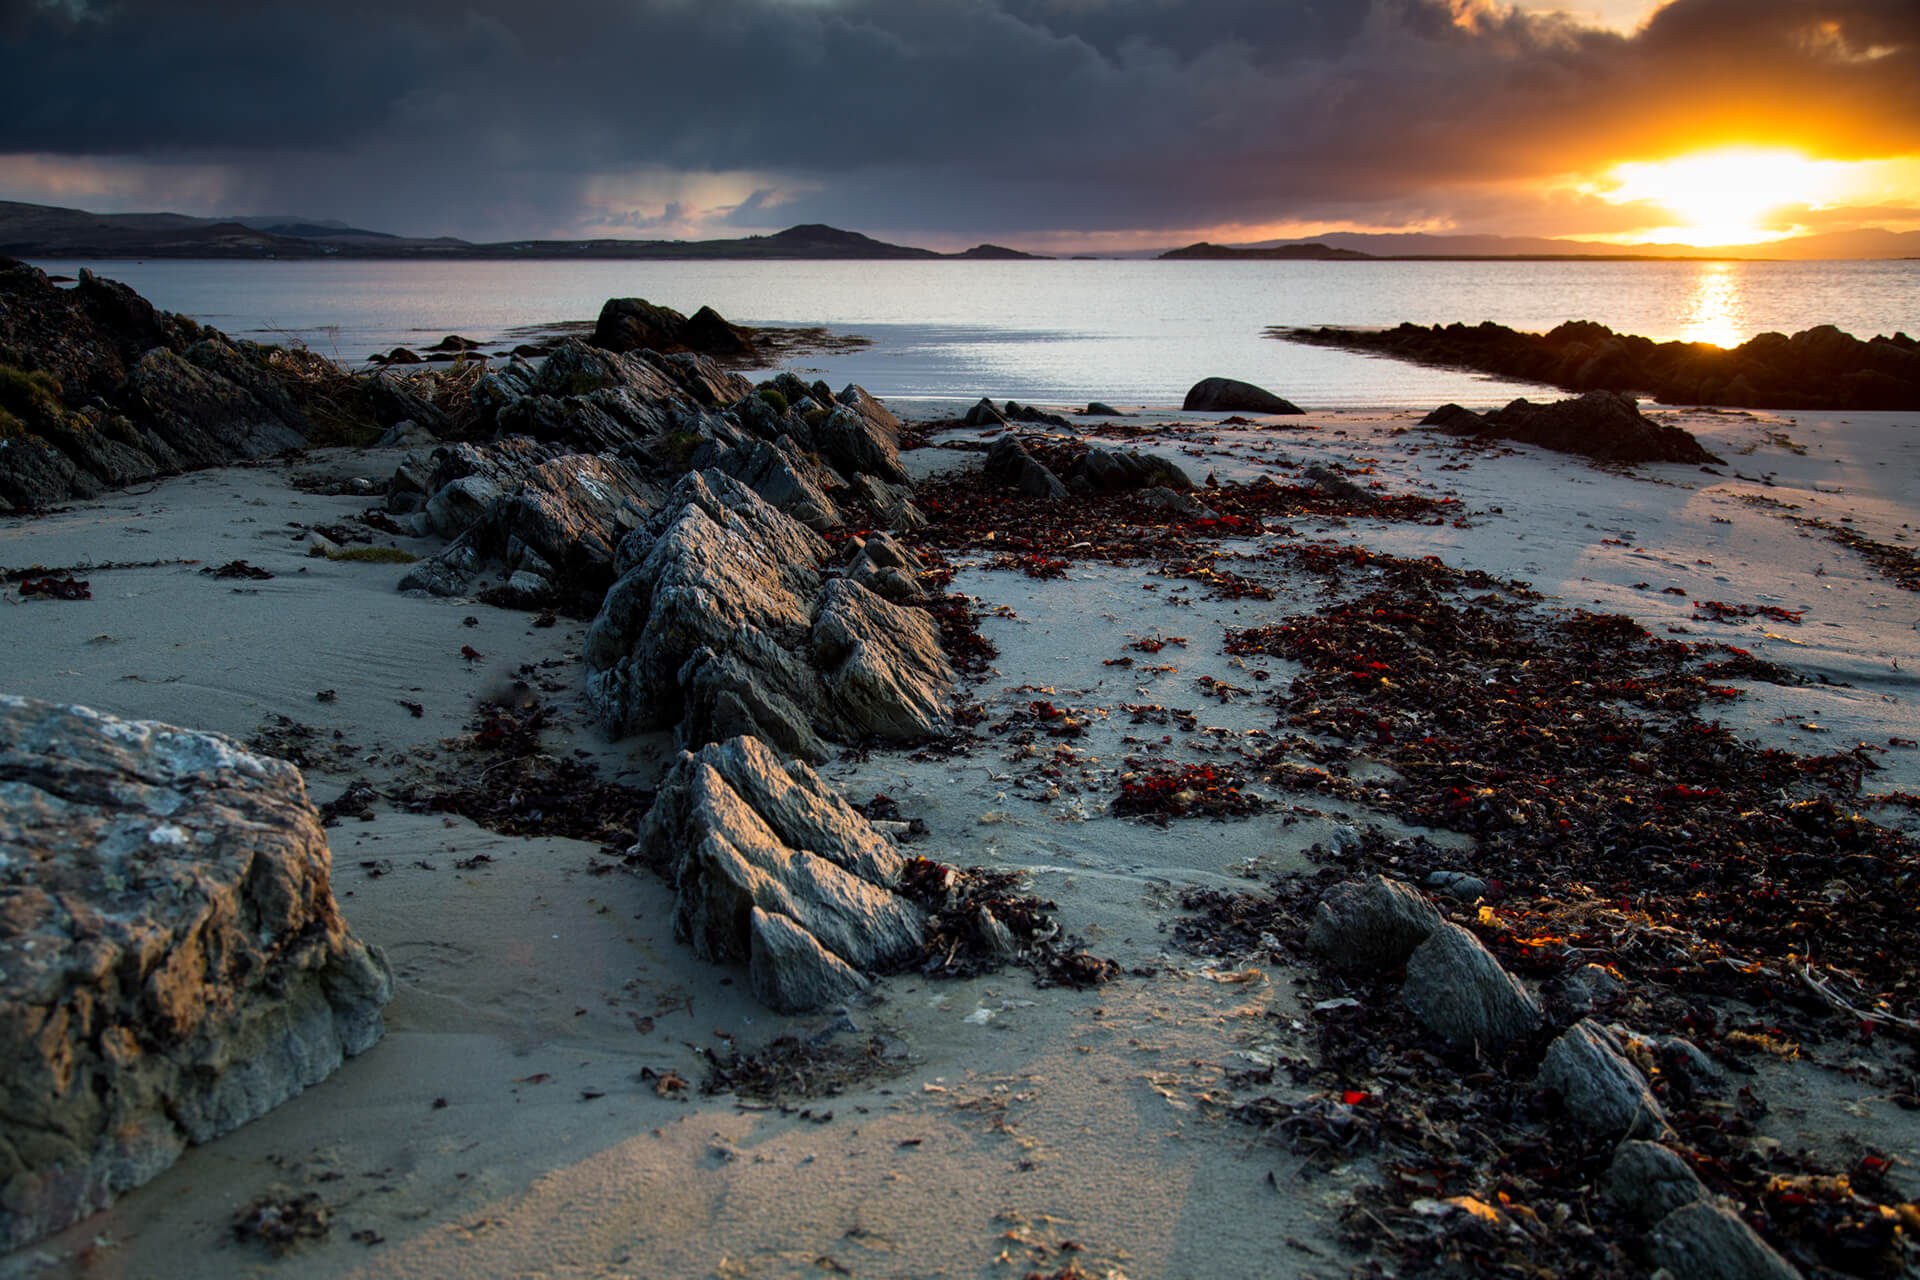 Bright sunrise over a picturesque beach on the island of Jura in the Hebrides